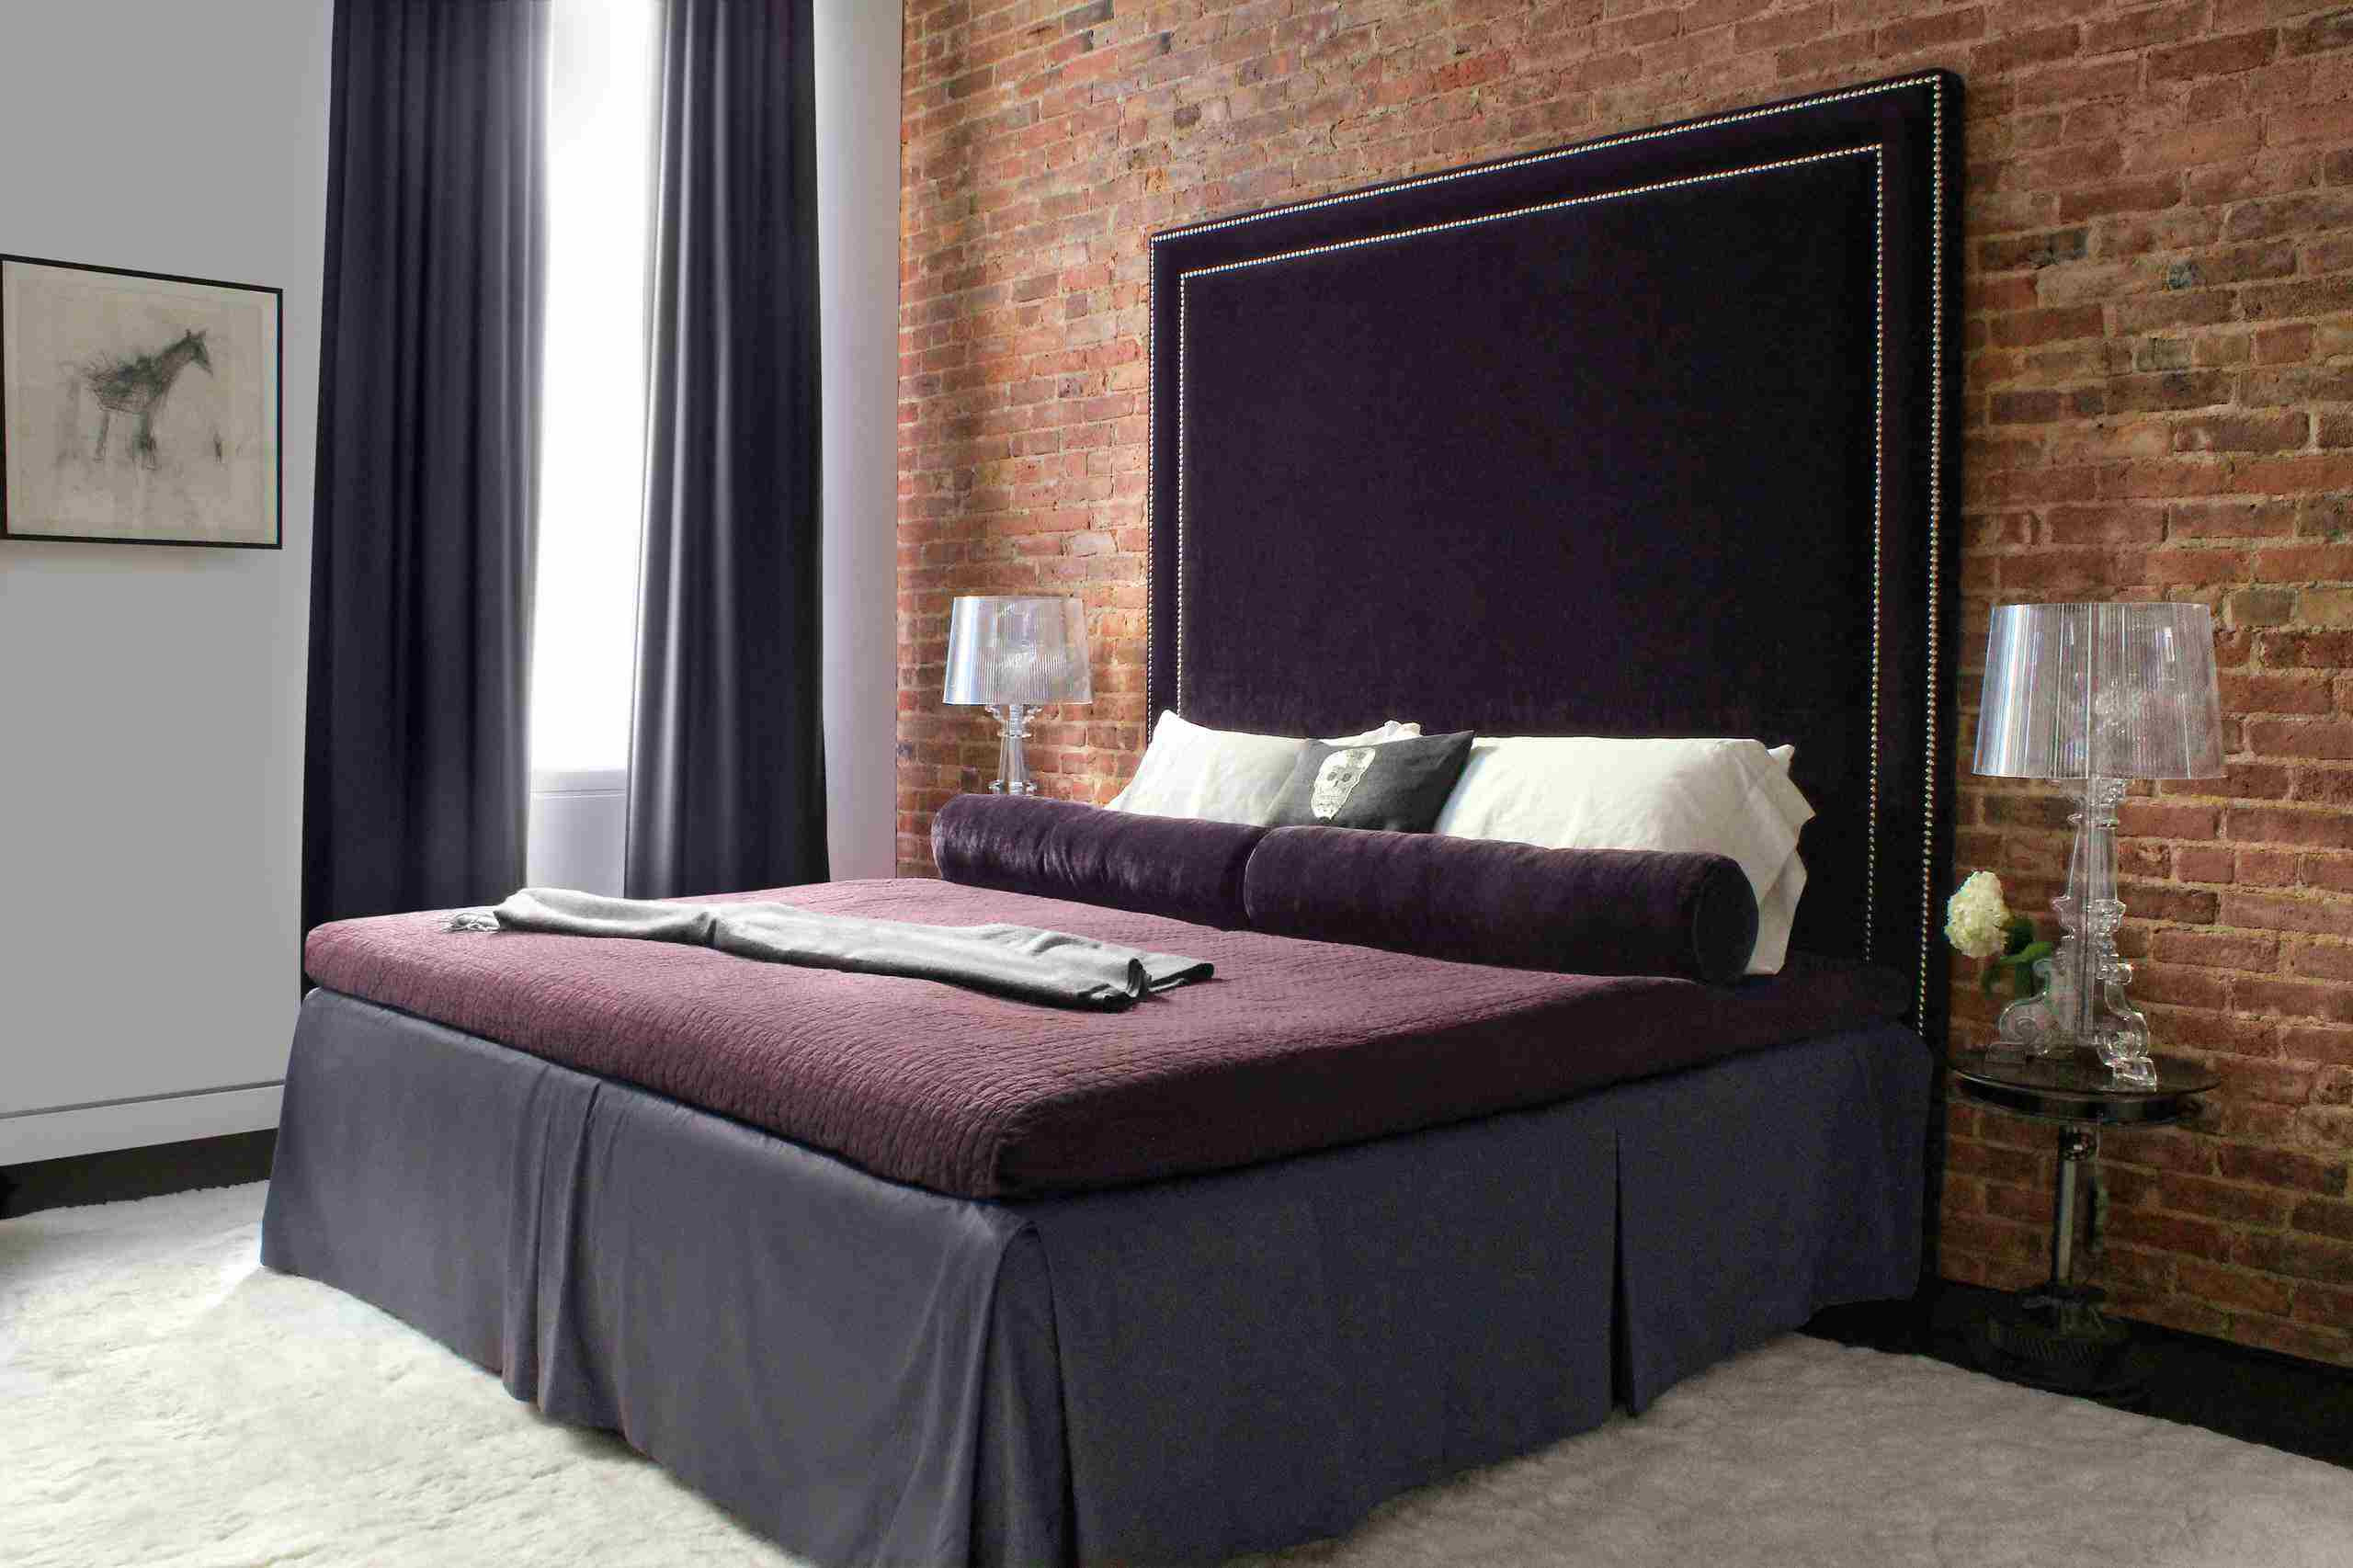 diy hardwood flooring headboard of 22 stylish bedrooms with chic upholstered headboards with regard to 5 brick accent wall home decor waplag white shag rug with bed skirt and contemporary bedding plus upholstered headboard contemporary brick home decor western home decor gothic unique diy ideas sincere